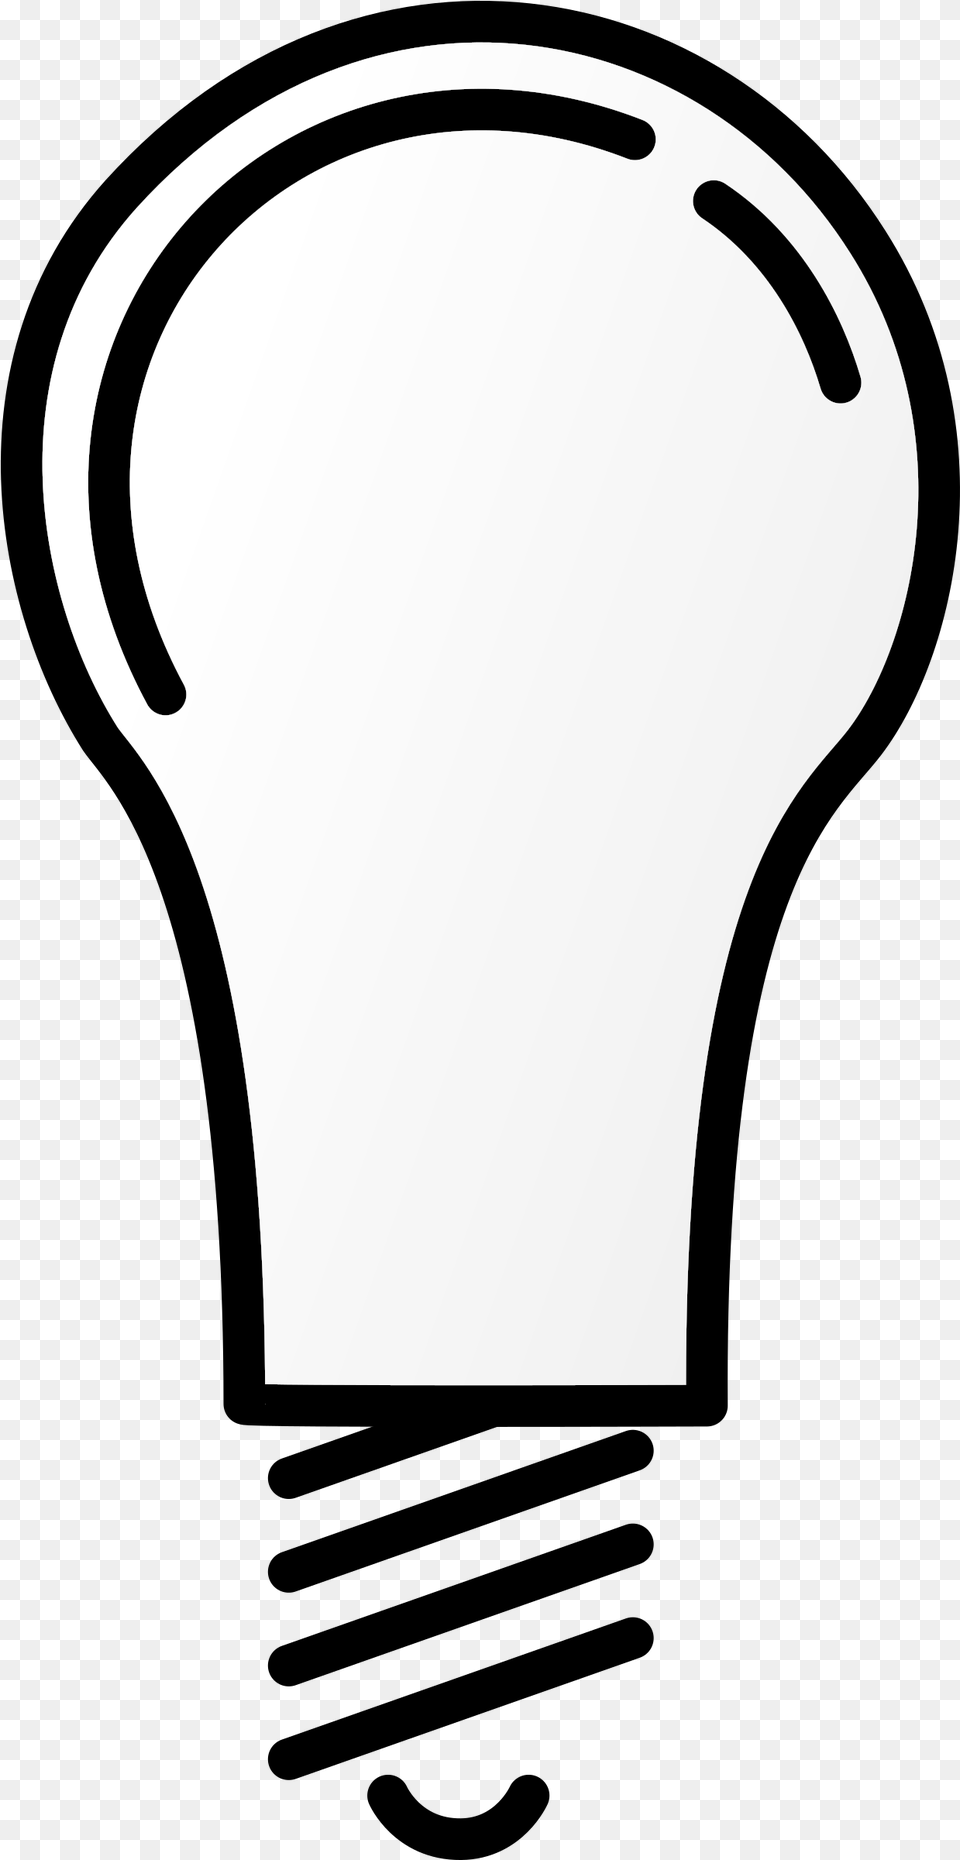 Light Bulb Outline Clipart Best Background Light Bulb, Lighting, Stencil, Cutlery, Spoon Png Image